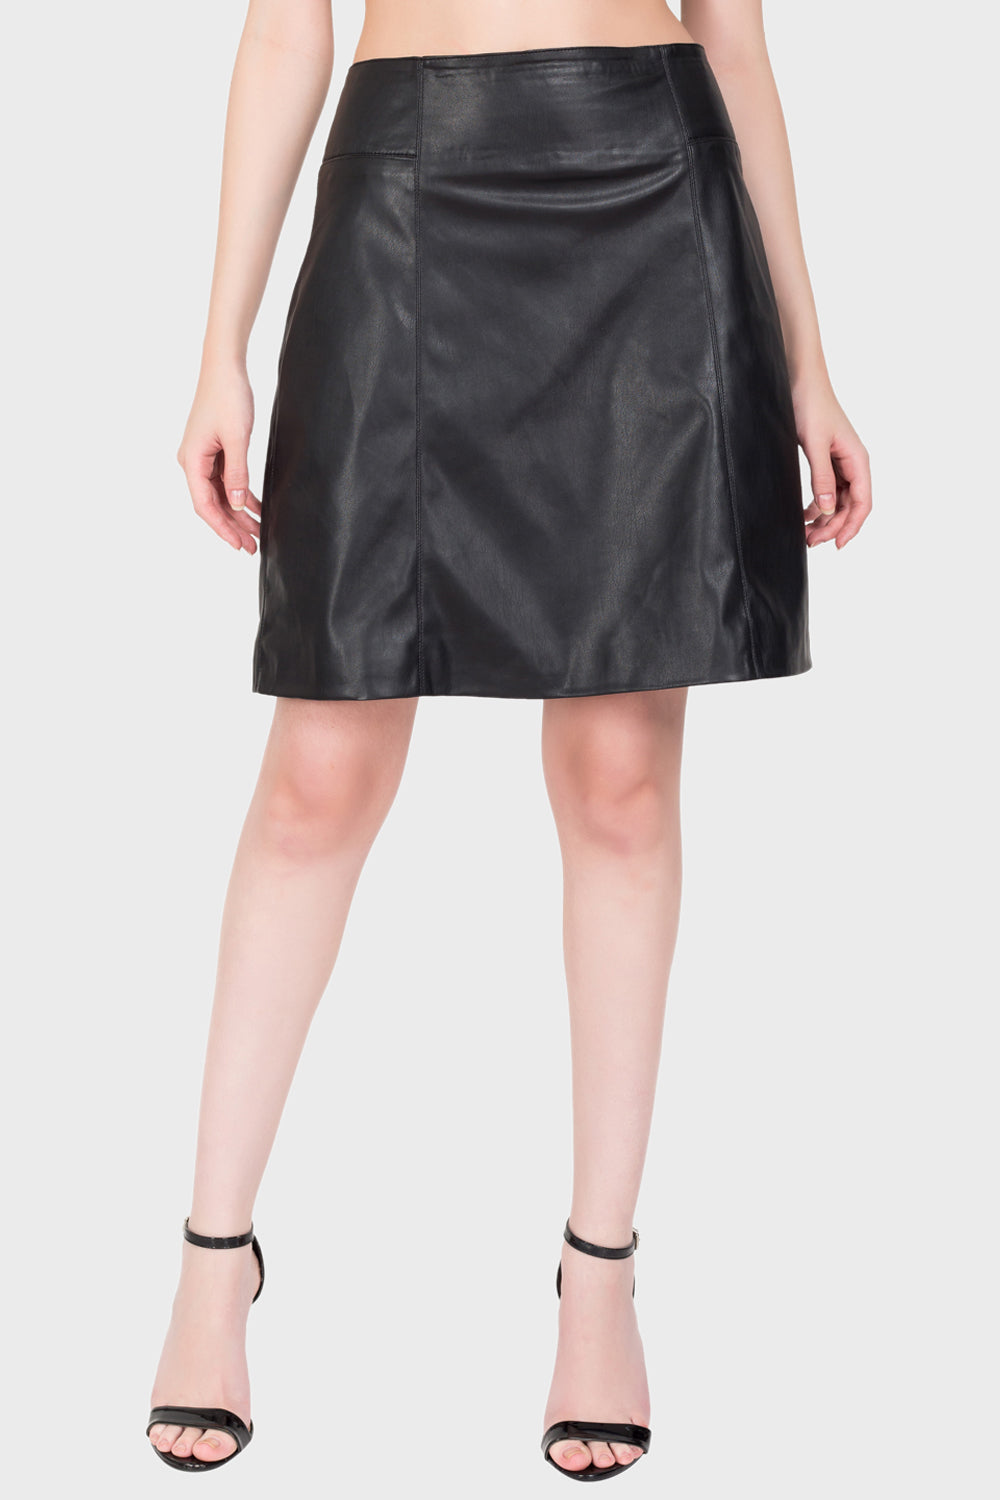 Justanned Lana Leather Skirt